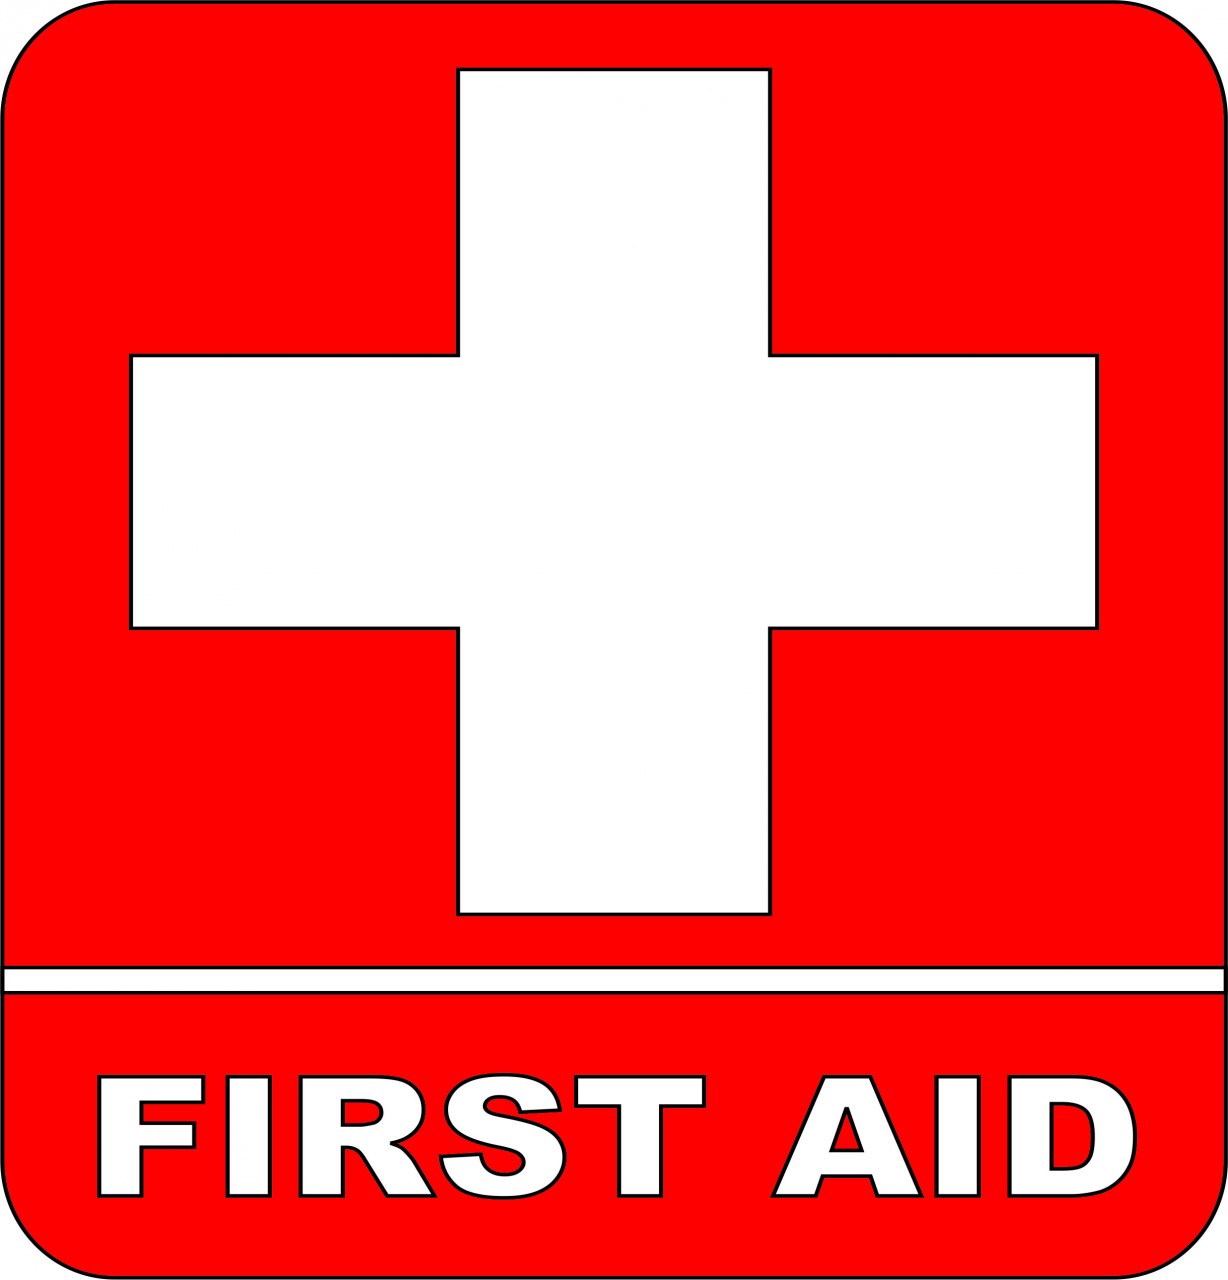 First aid symbol clipart